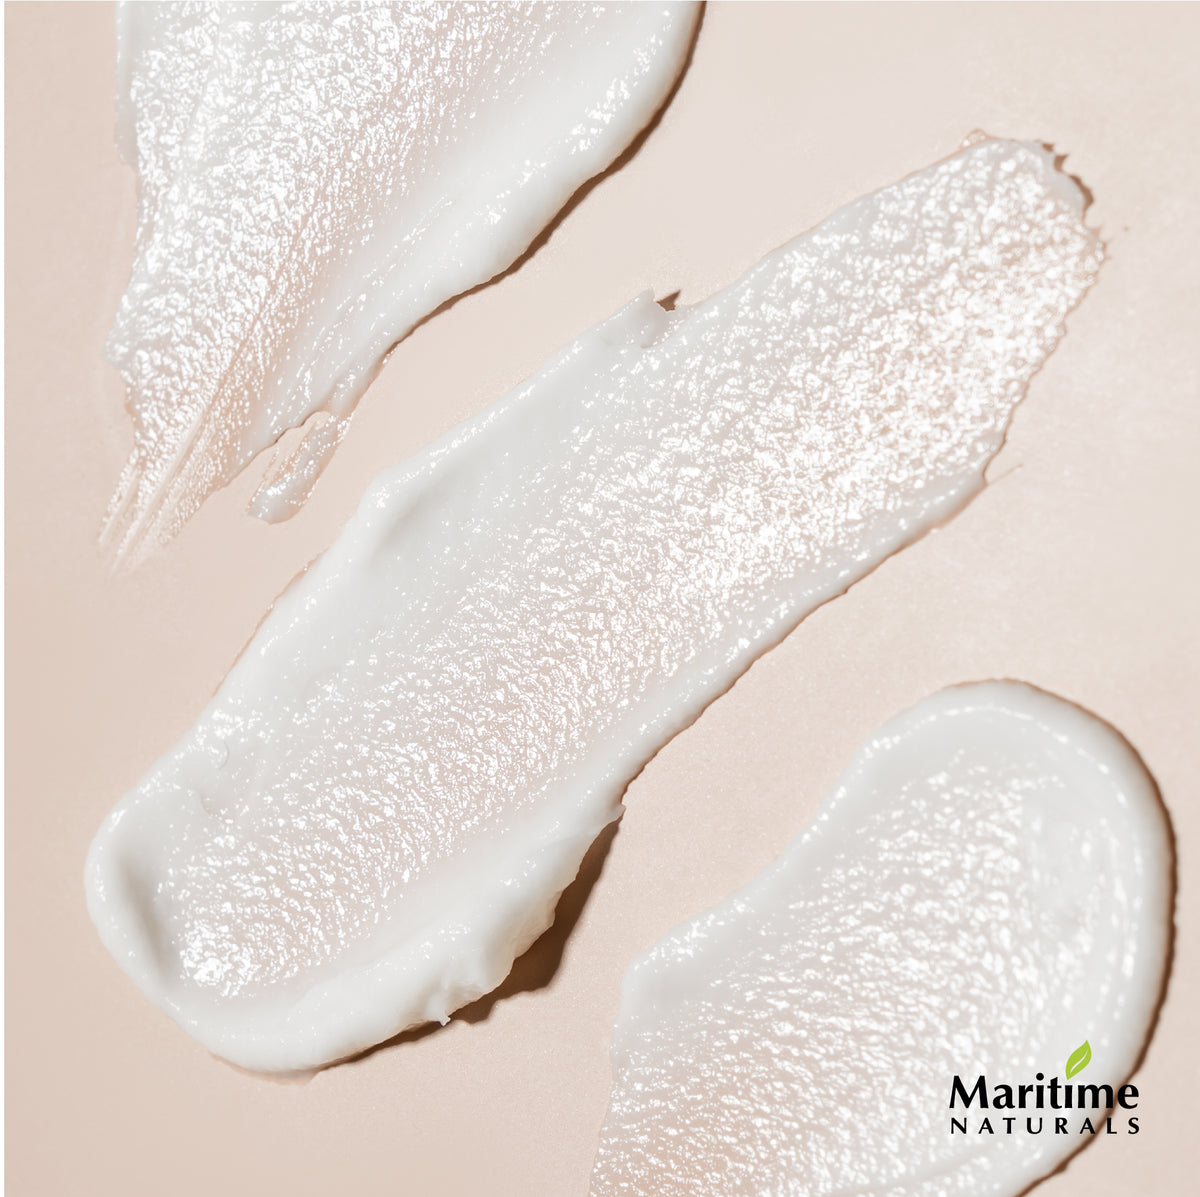 exfoliating scrub feels slightly sandy yet also cream, goes on to smooth skin and exfoliate gently